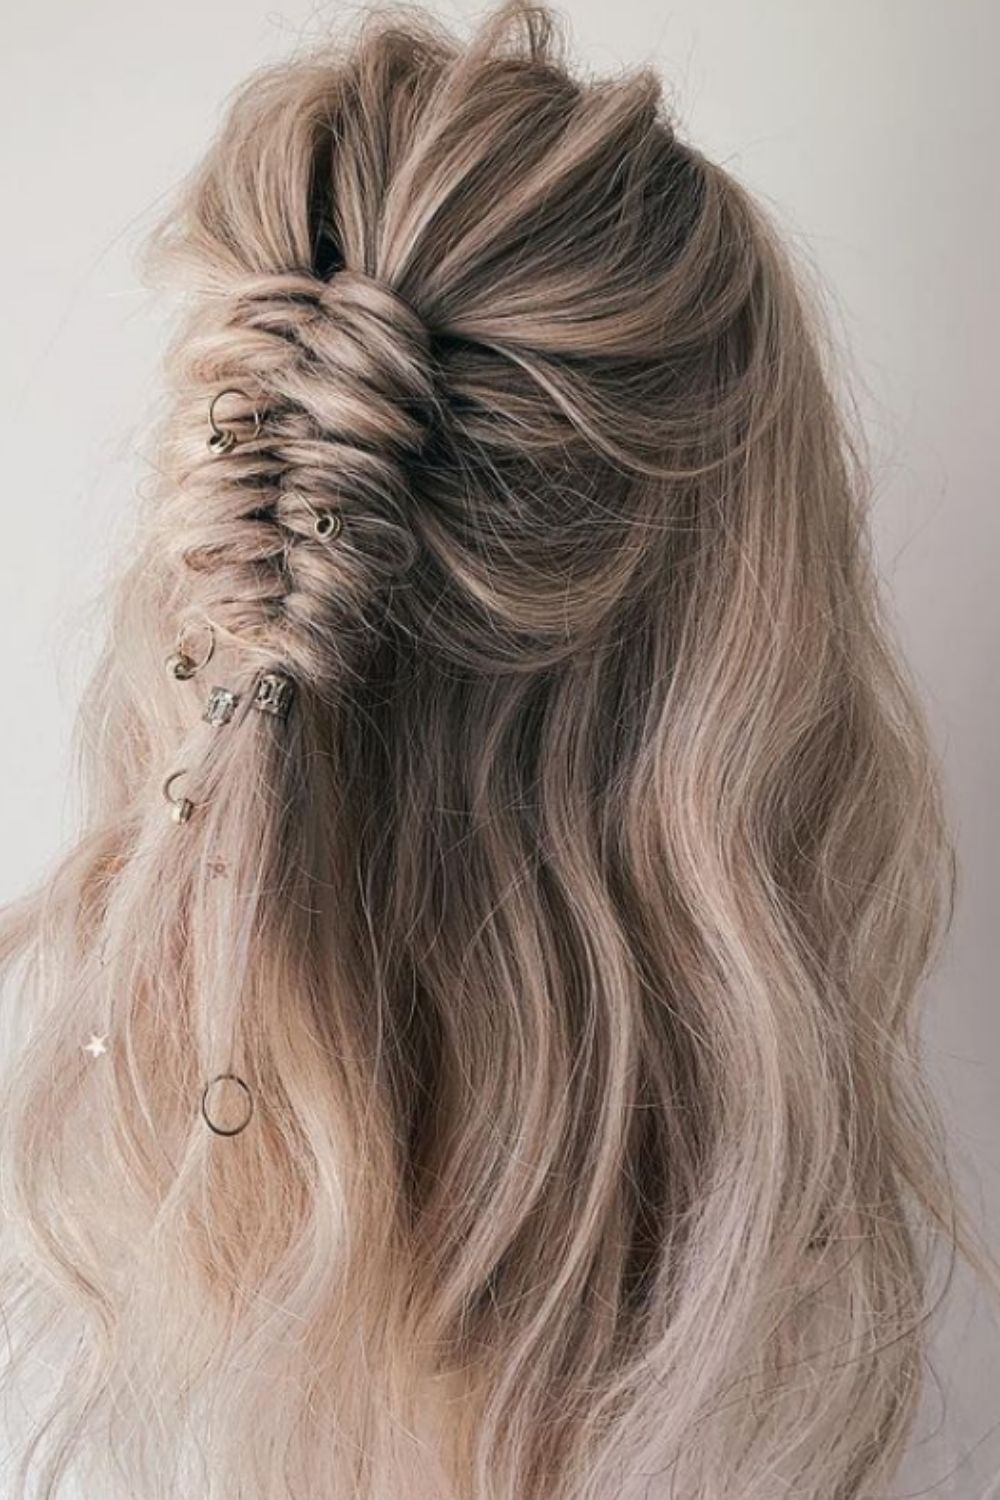 Elegant and charming wedding hairstyle for bride